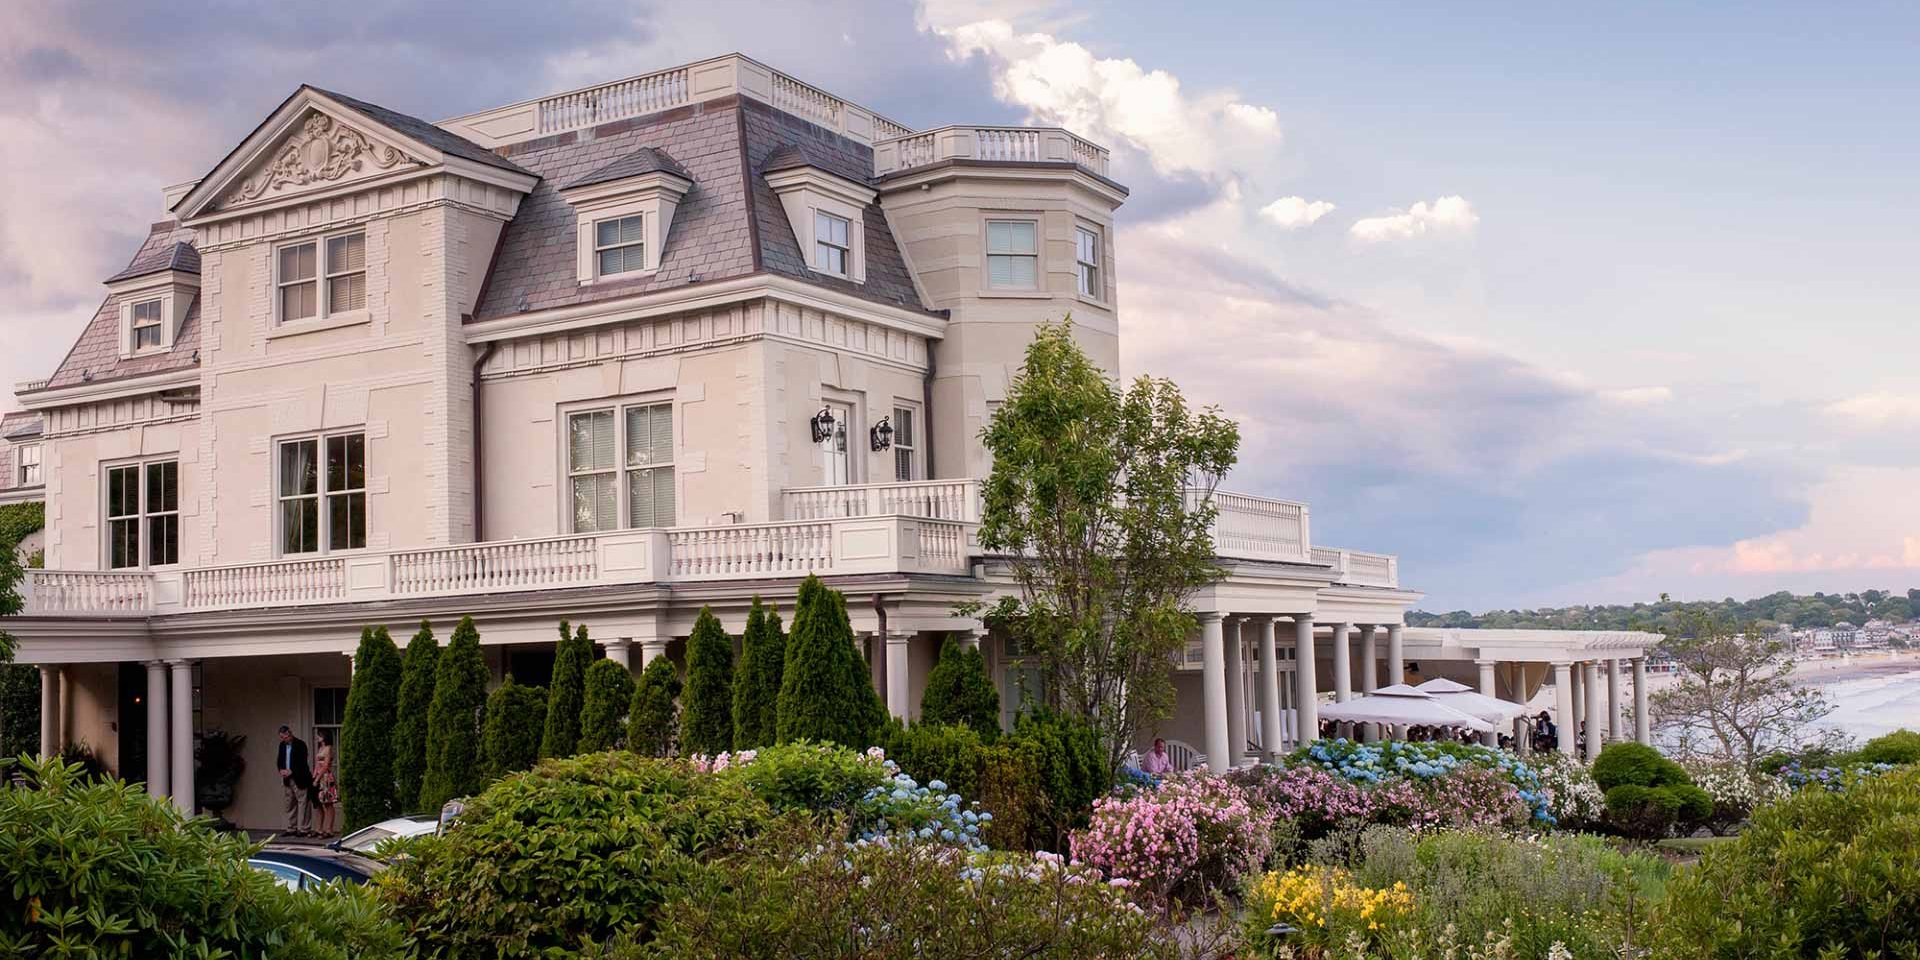 The Chanler At Cliff Walk